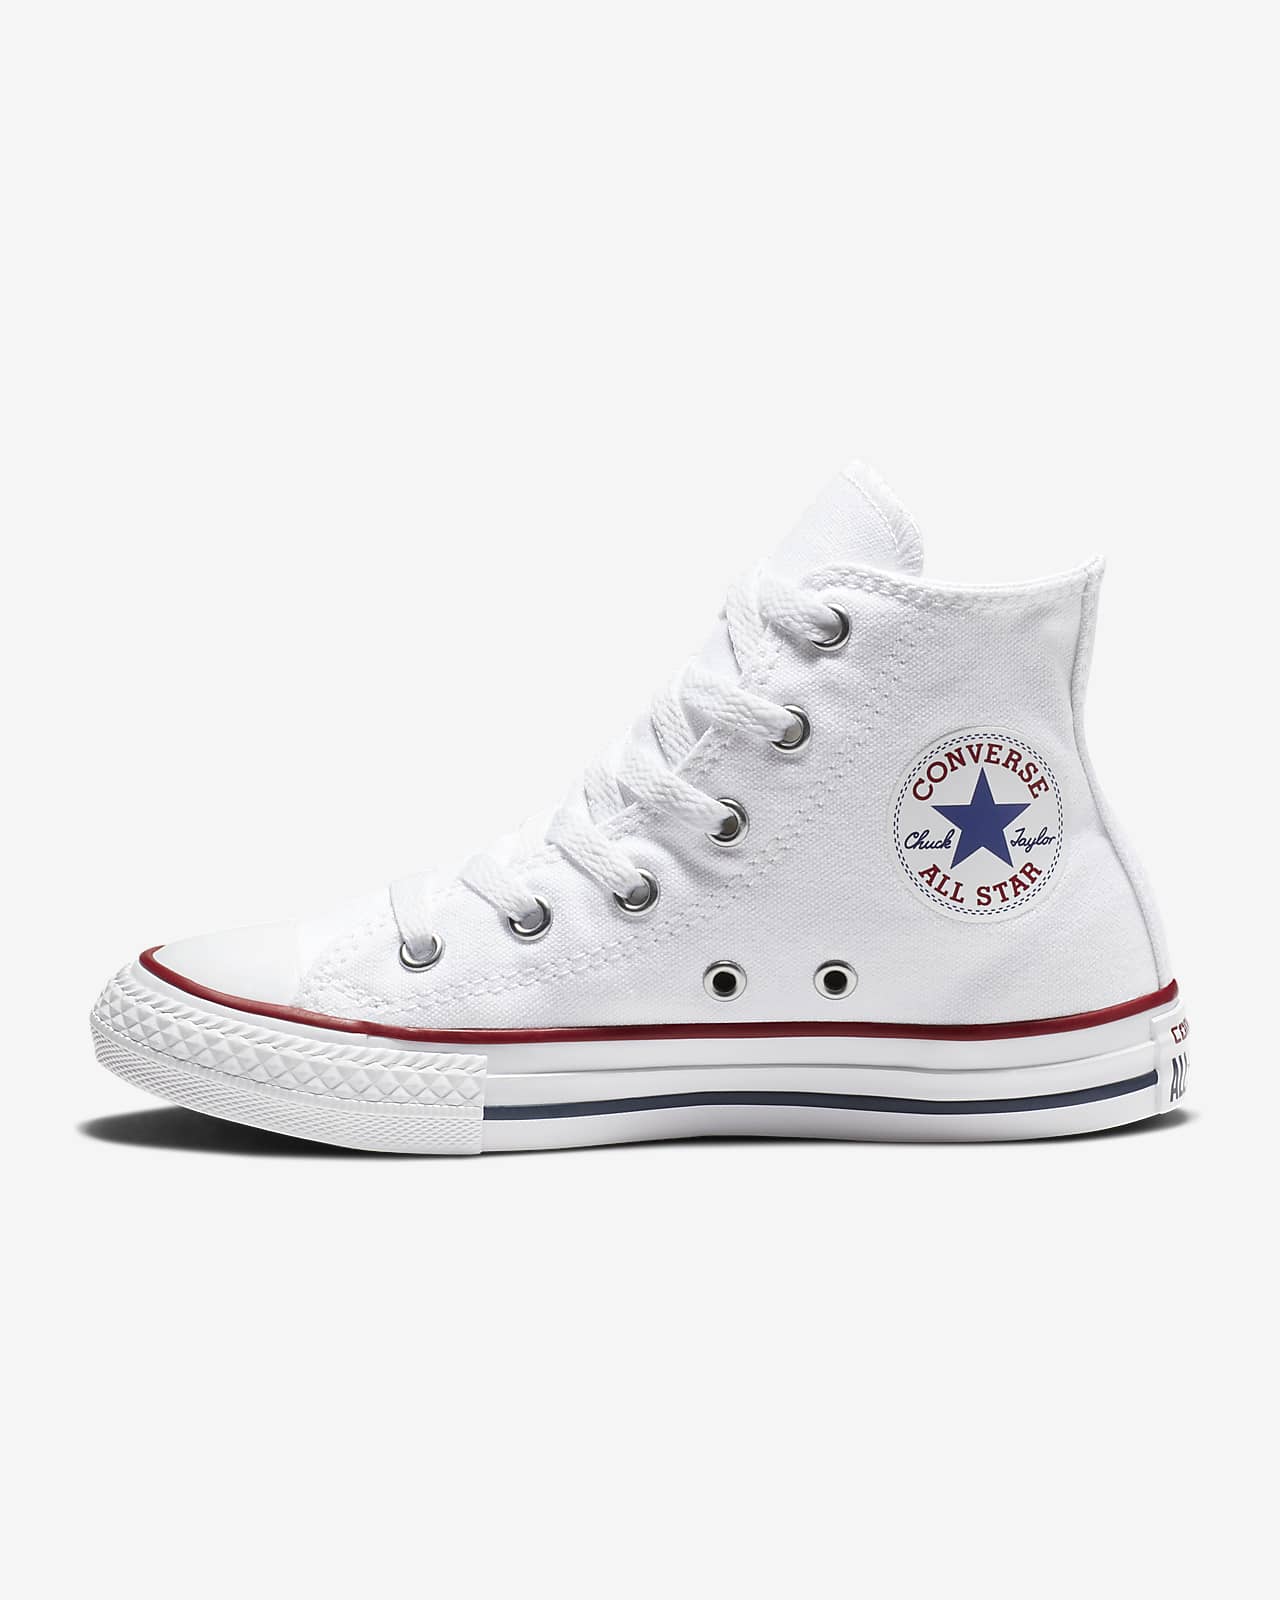 Converse Chuck Taylor All Star High Top (10.5c-3y) Little Kids' Shoe